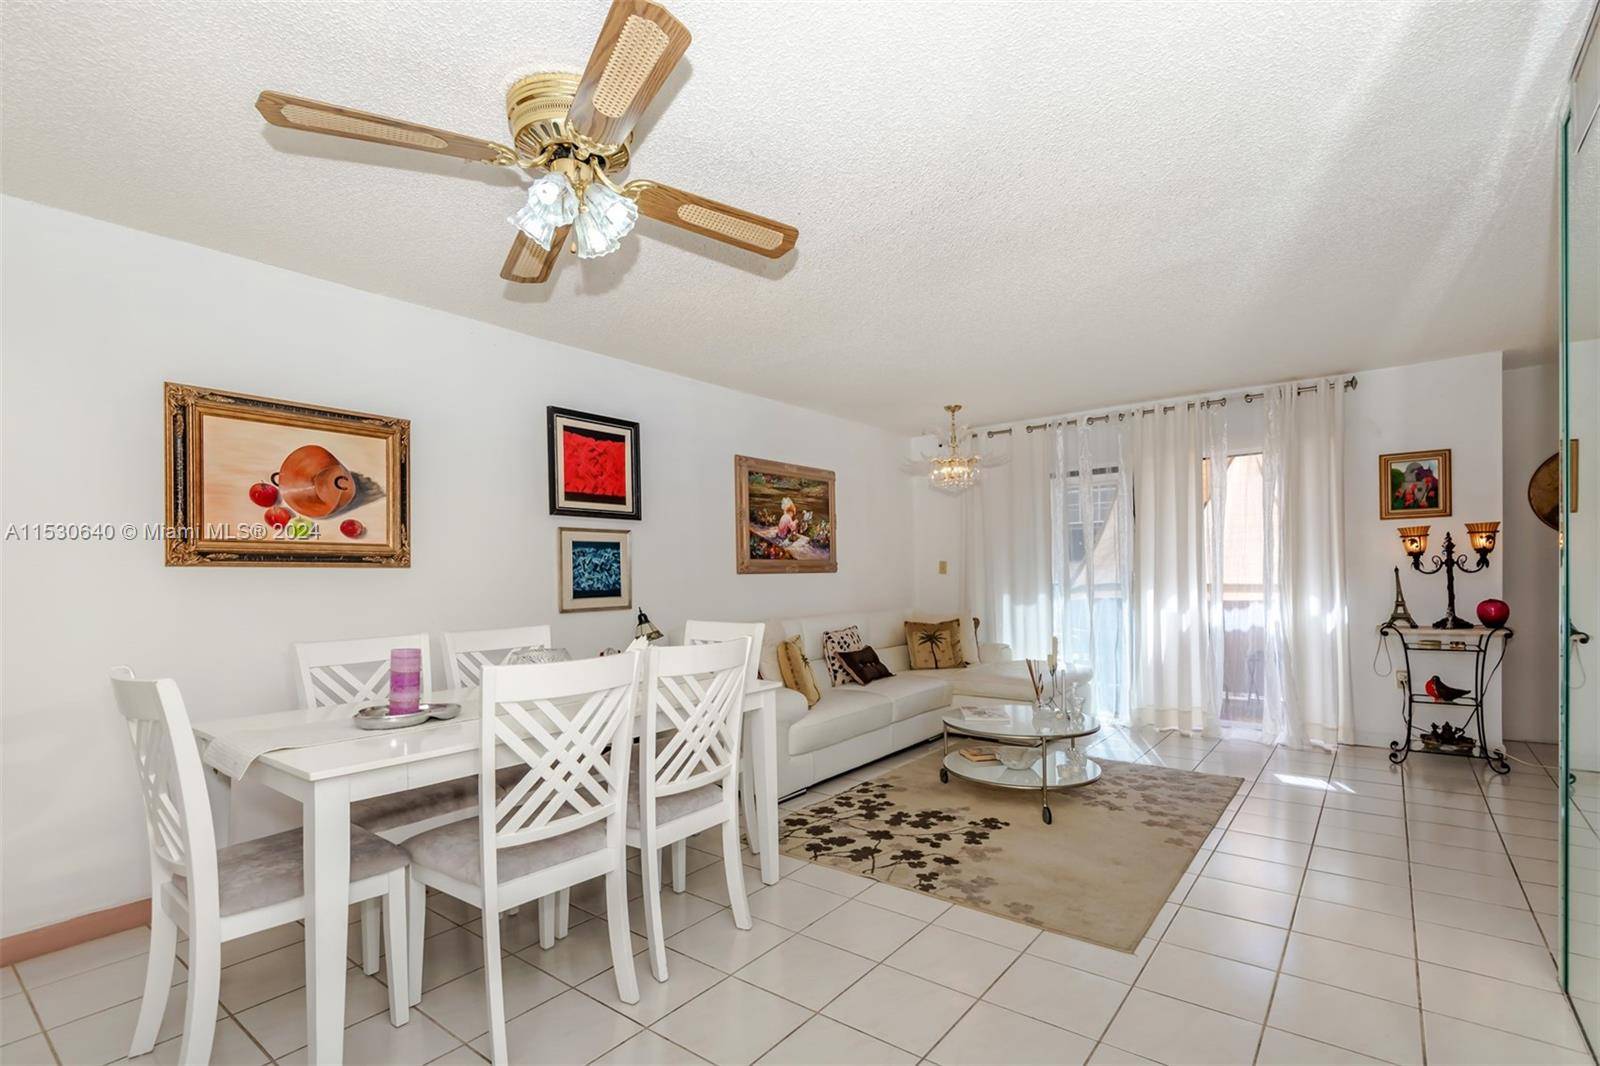 Fantastic unit 2 2 with a great location, close proximity to the beach, publix, restaurants, banks, close to everything with a super affordable maintenance fee, gated parking space, pool area.